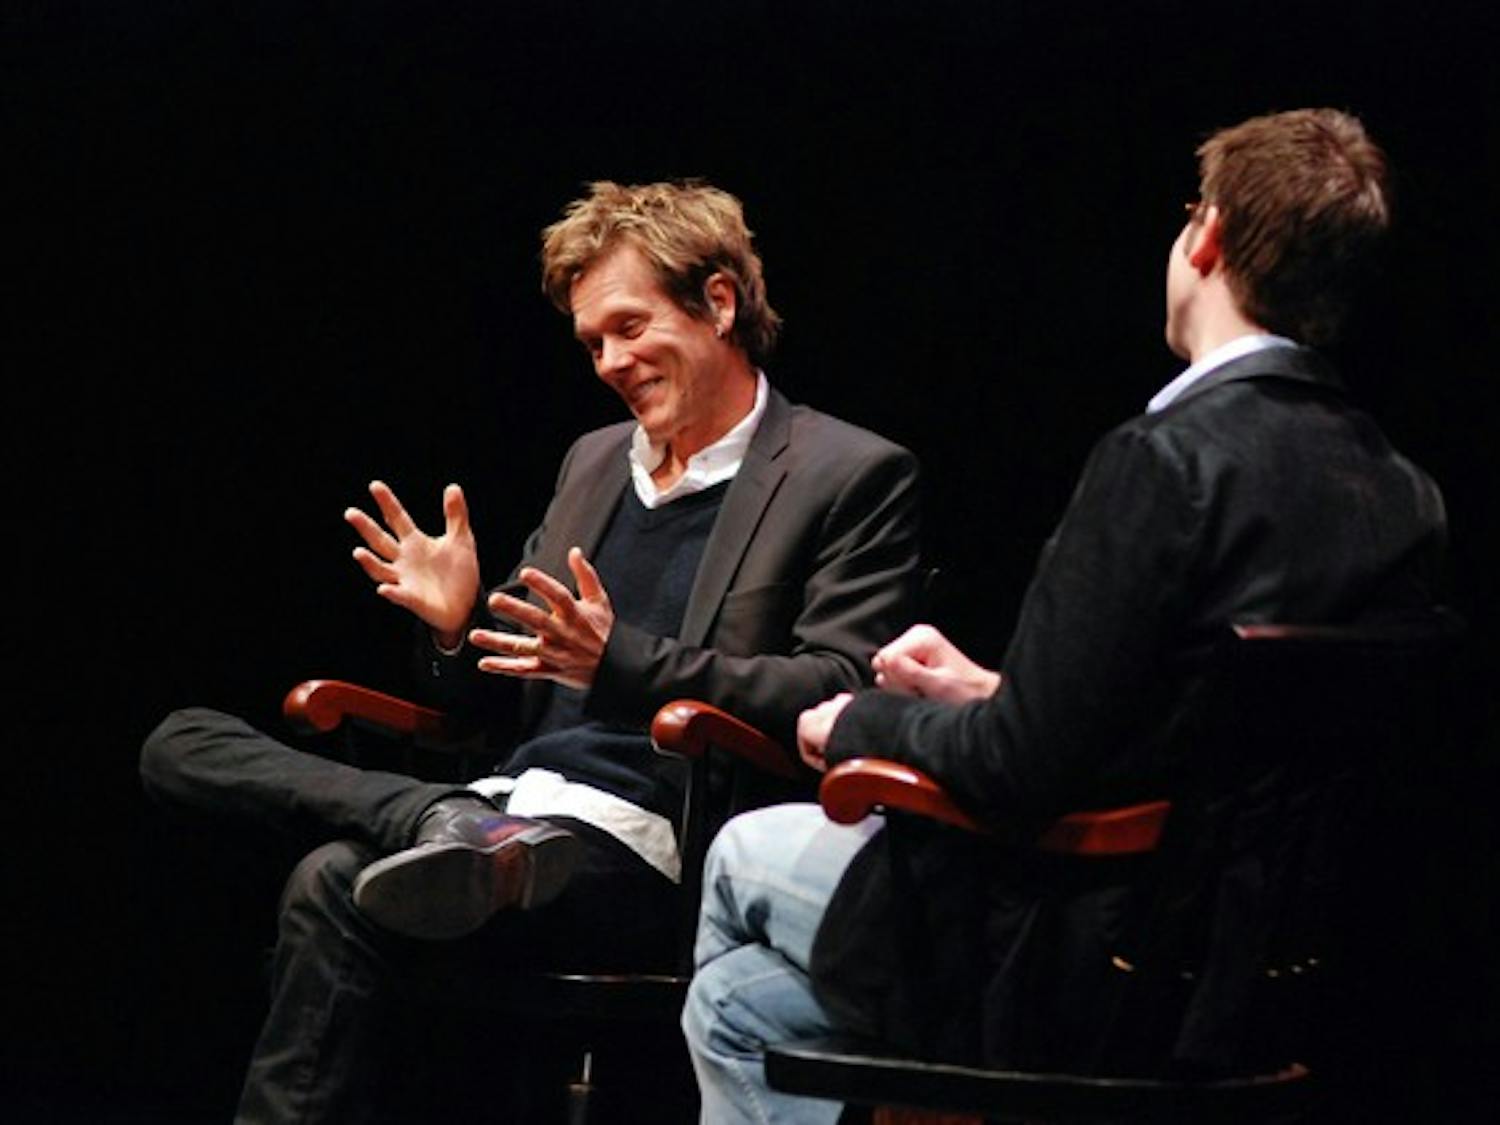 Kevin Bacon discusses his career after receving the Dartmouth film award.